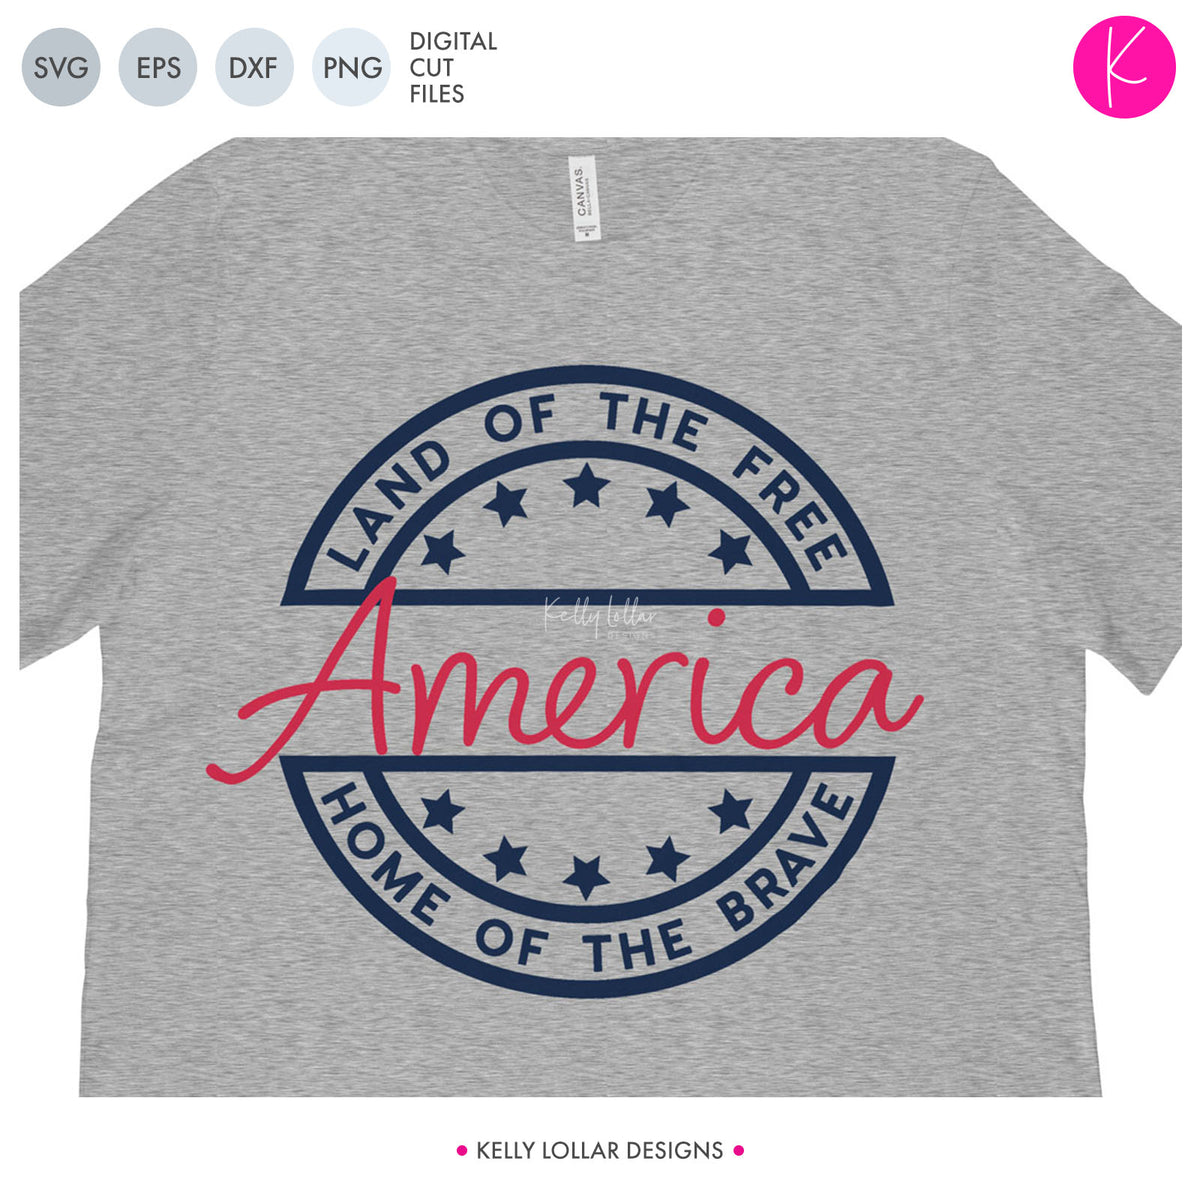 America: Land of the Free Home of the Brave | SVG DXF EPS PNG Cut Files